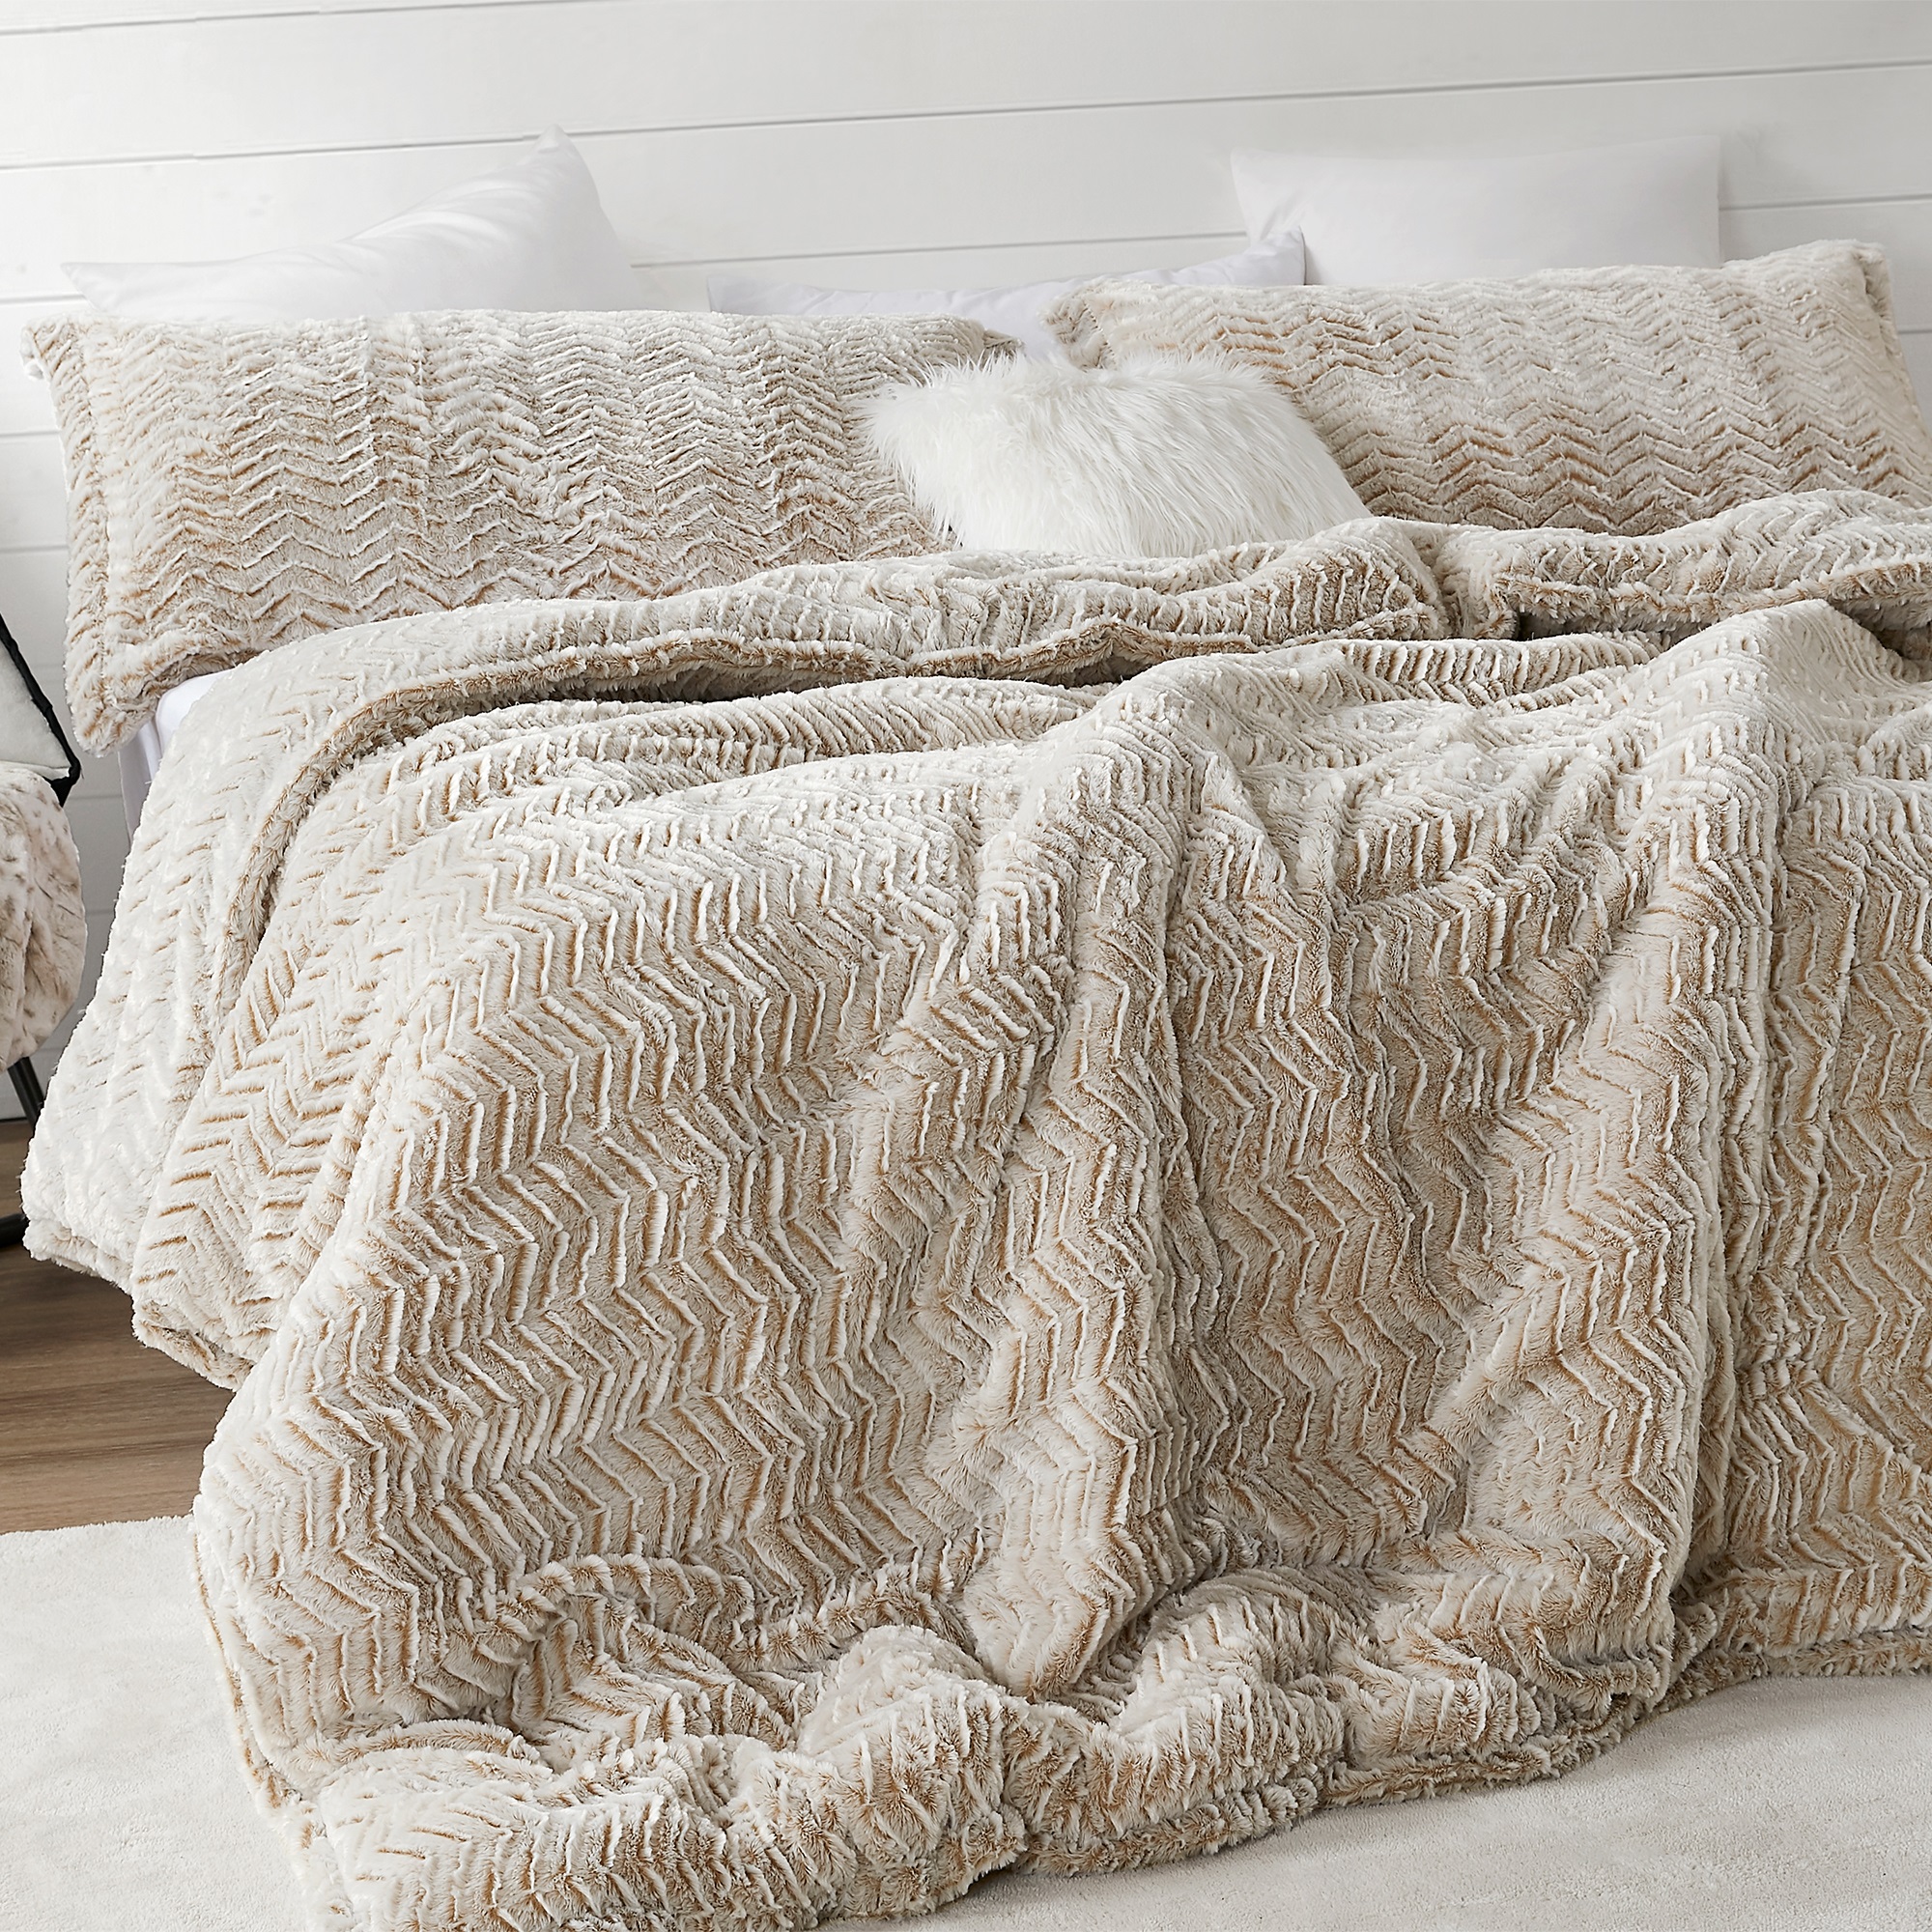 Peak of Cozy - Coma Inducer Oversized Comforter - Chevron Frosted Taupe